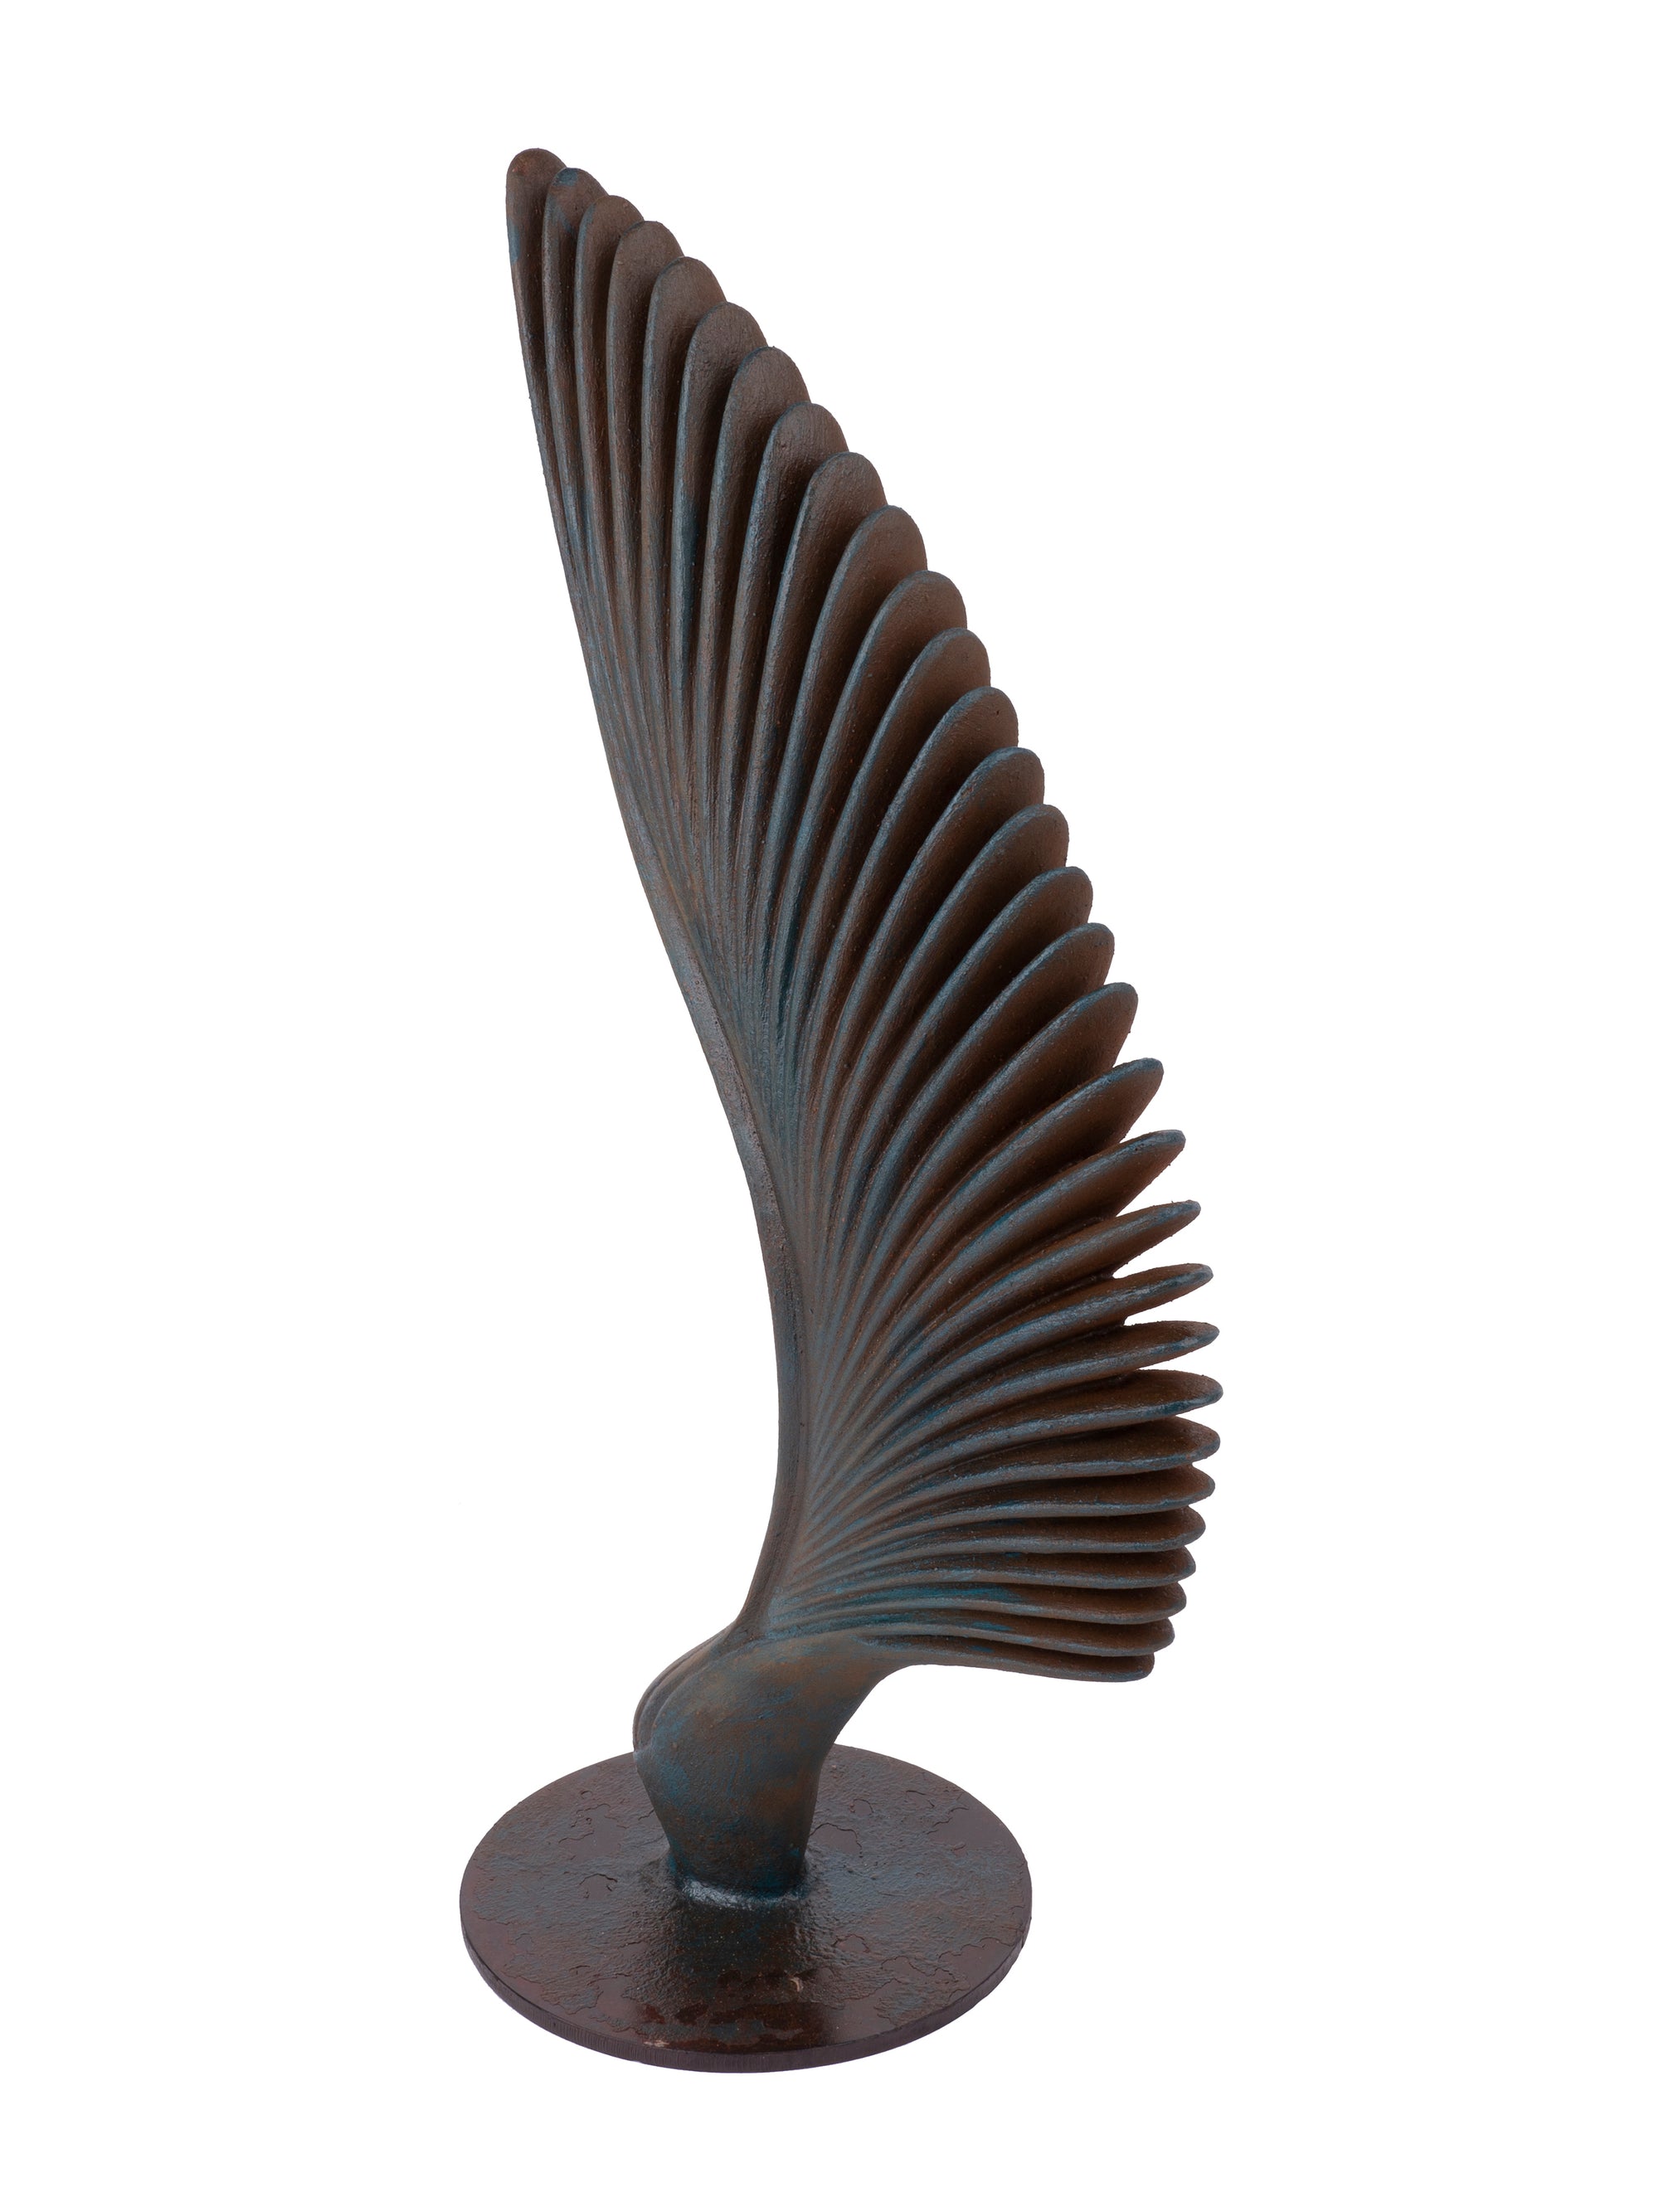 Sculpture name - WINGS OF LIFE (antique blue finish) - The Heritage Artifacts